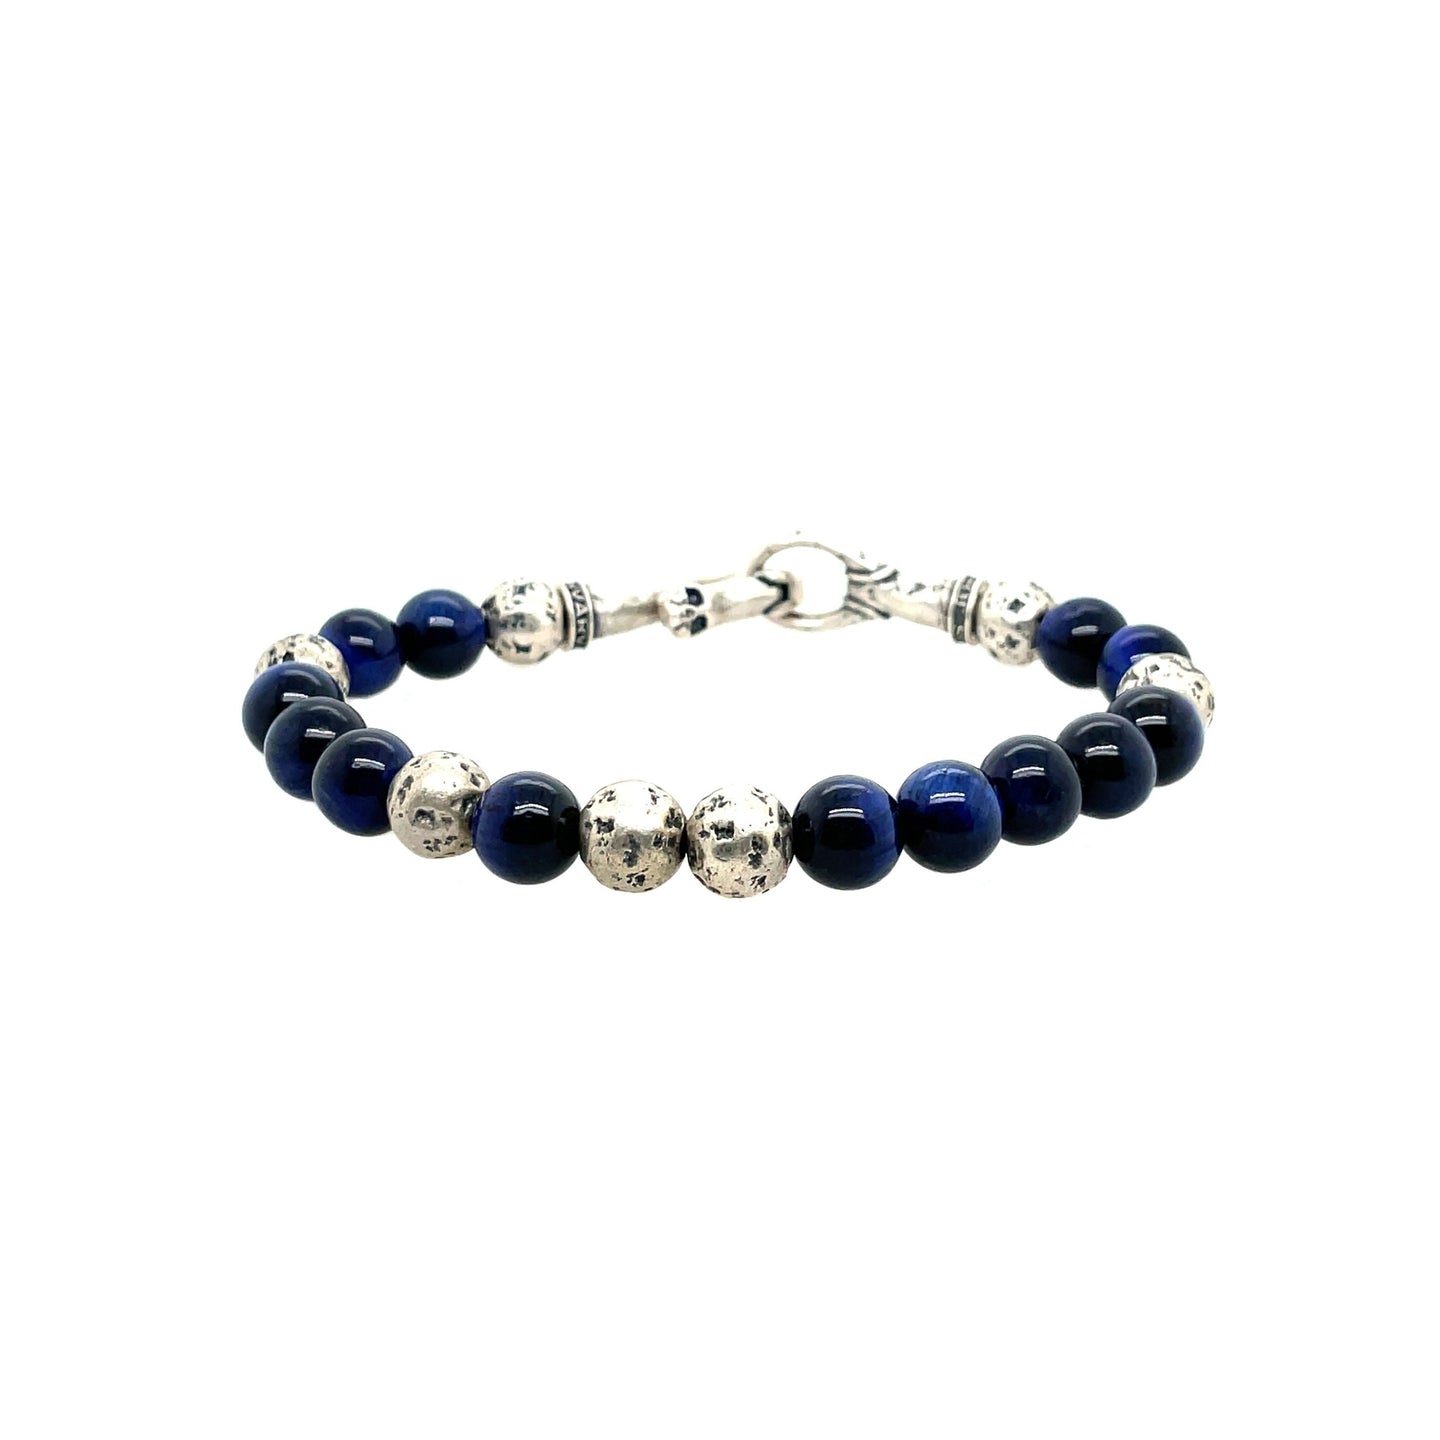 Blue Tigers Eye and Sterling Silver Beaded Bracelet